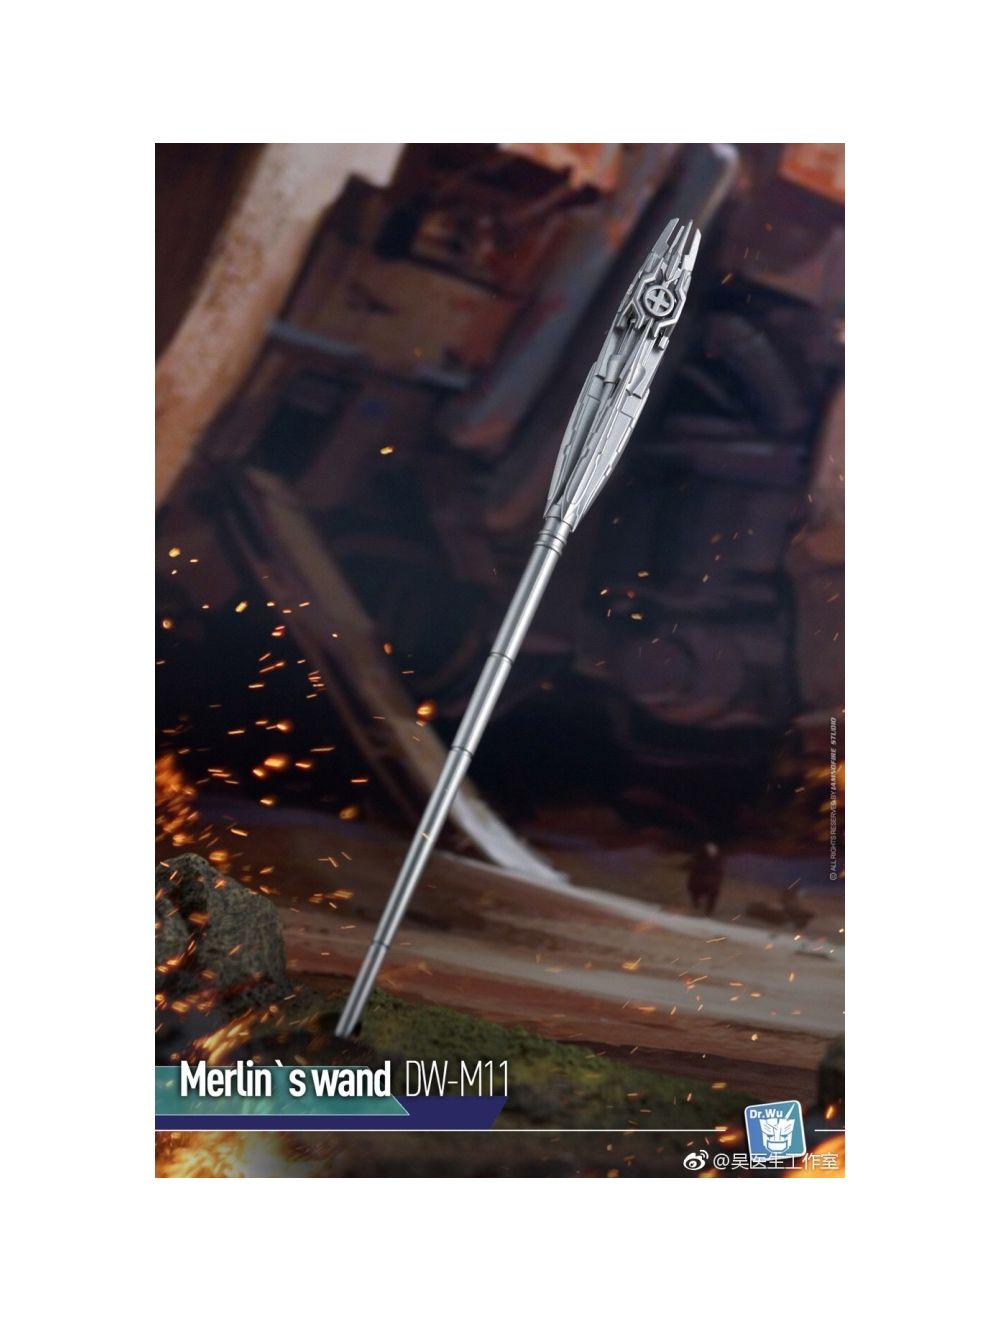 DW-M11 MERLIN'S WAND Sliver Version,In stock! WU DR